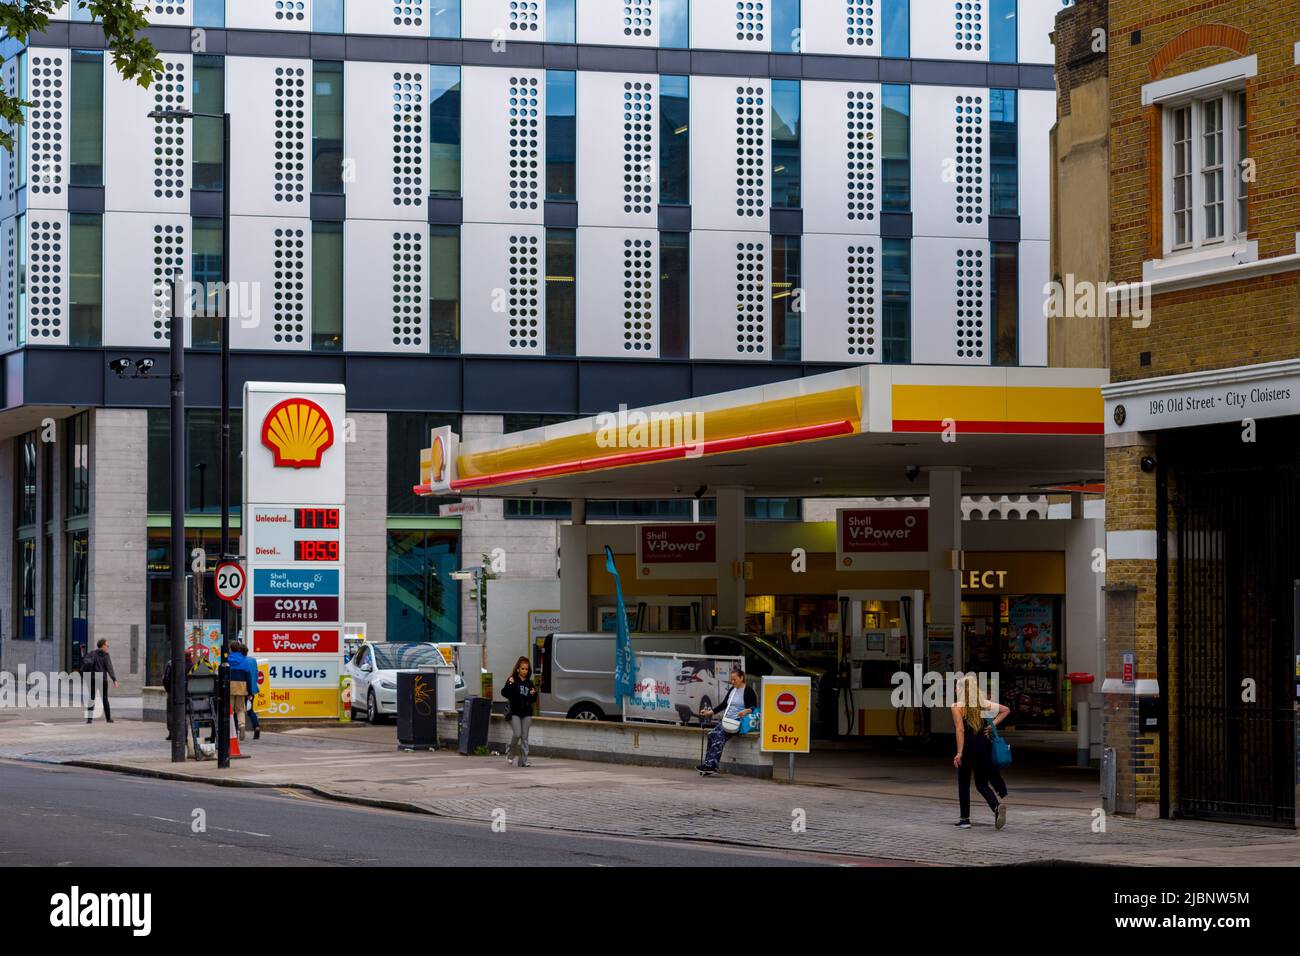 City Centre Garage Petrol Station - Shell Petrol Station in Central London near Old Street Roundabout. Shell Petrol Station Signs. Stock Photo